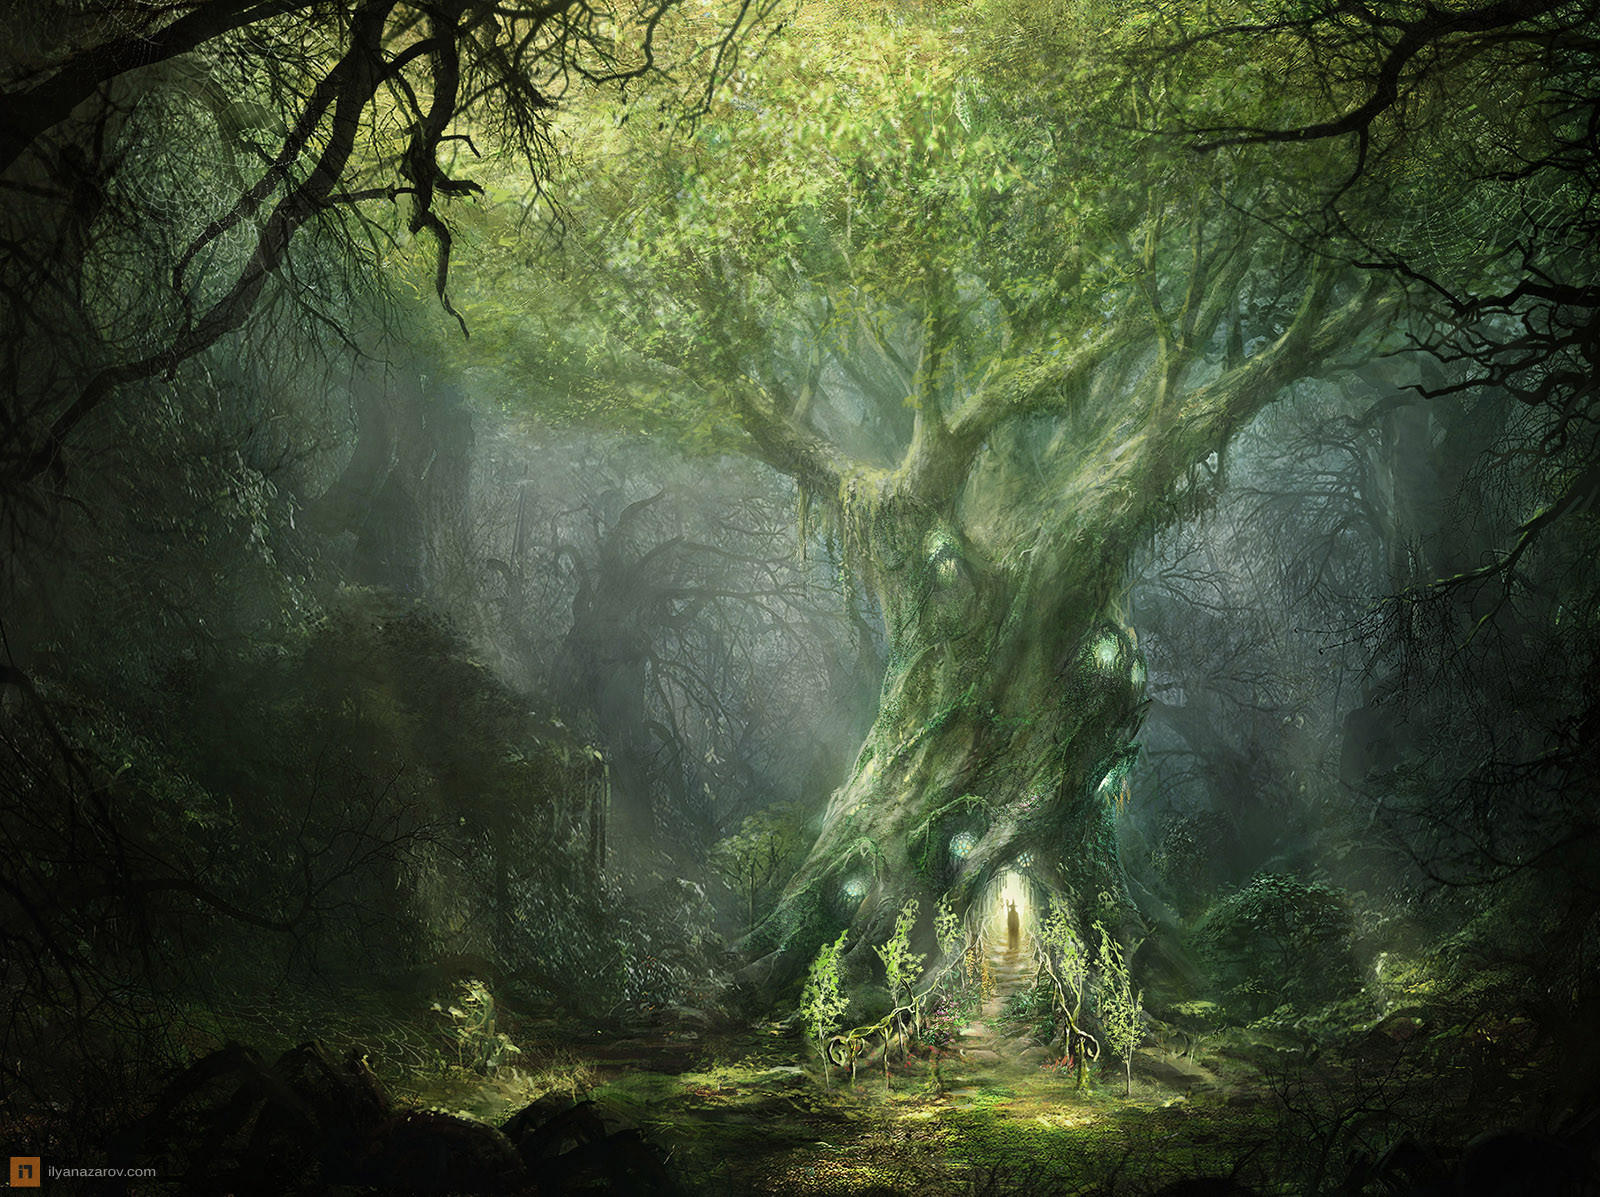 The Lord of The Rings: Radagast Tree House